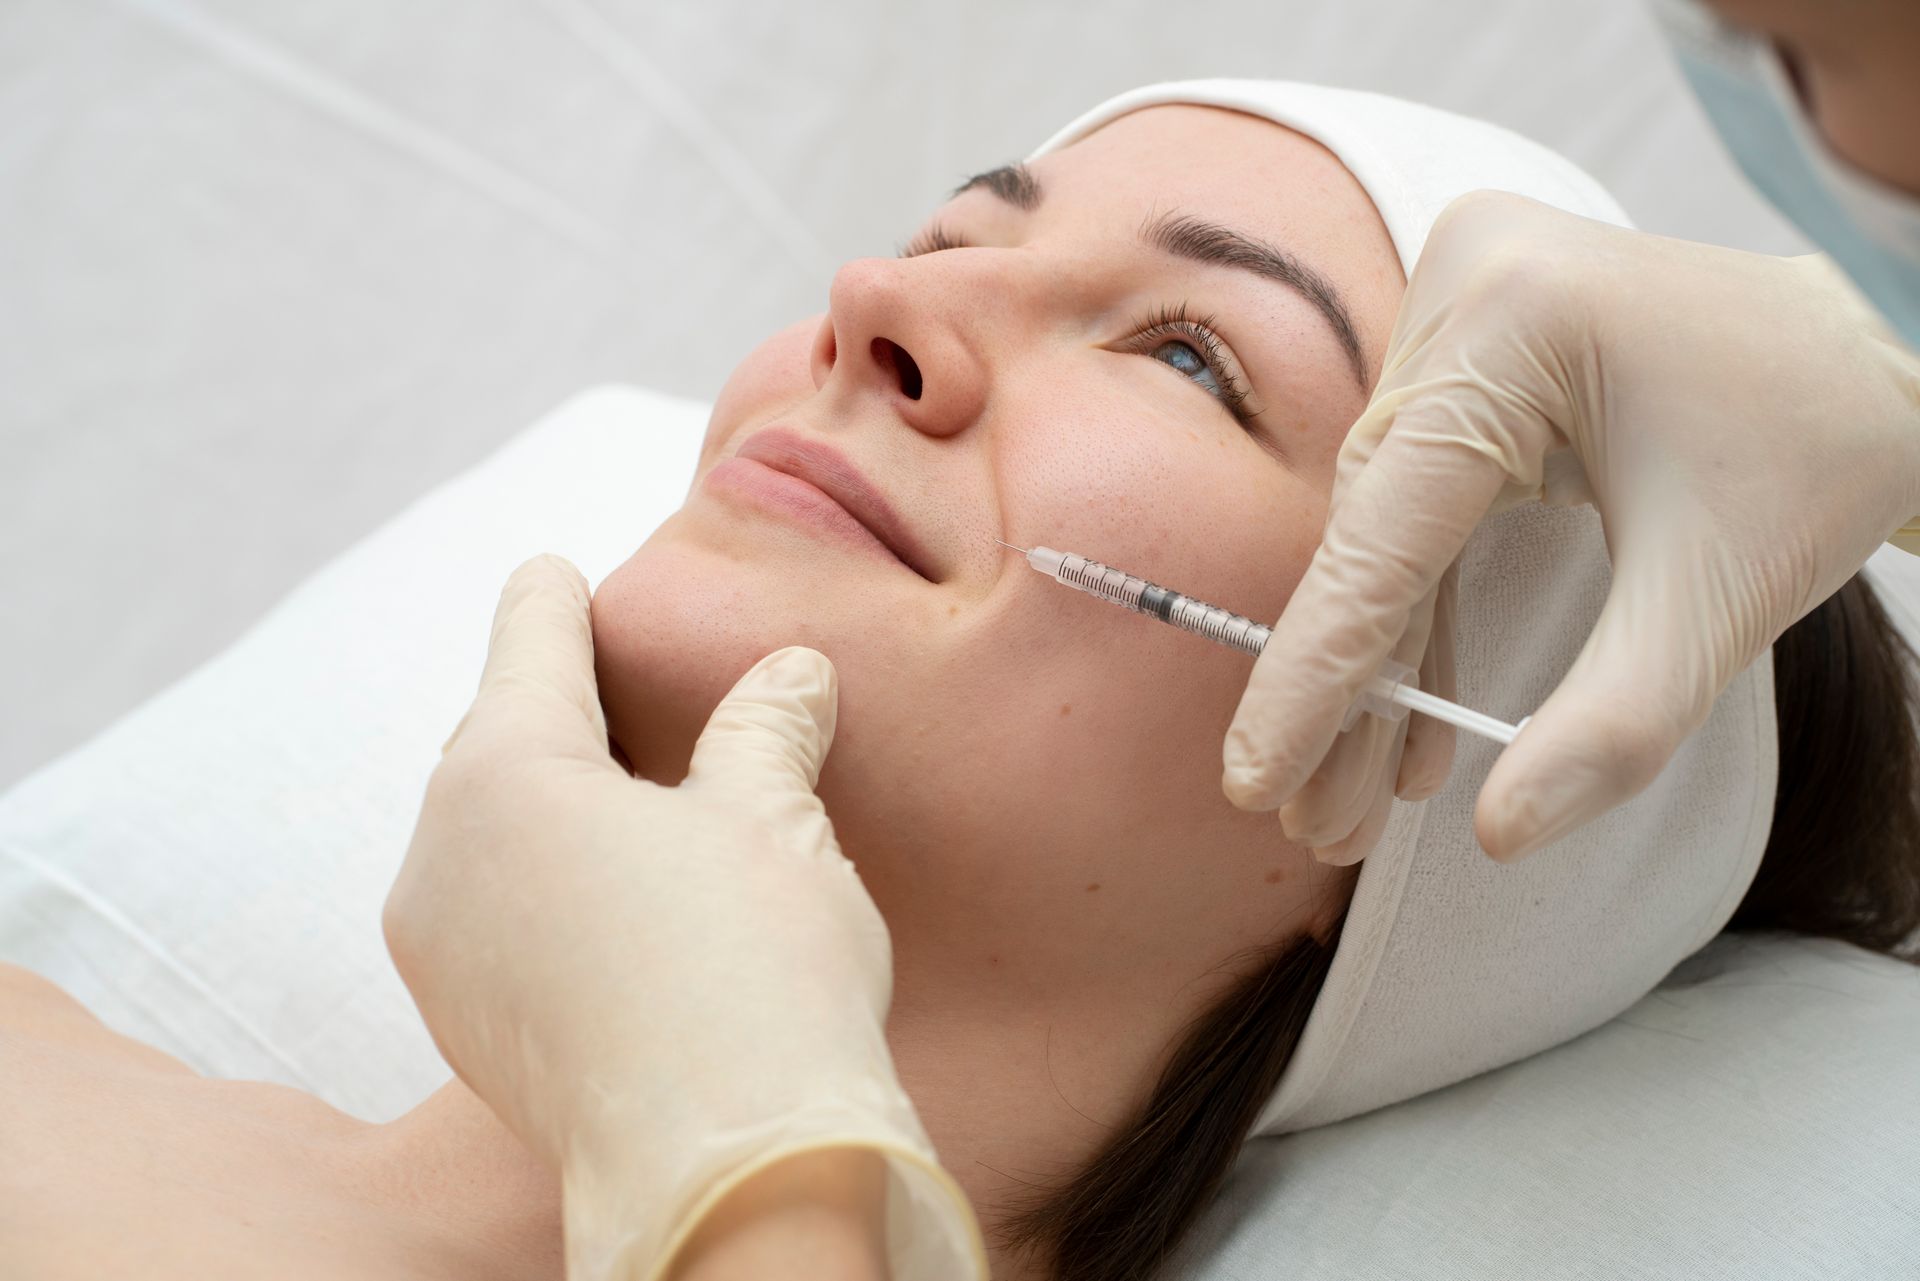 a woman is getting a botox injection in her face